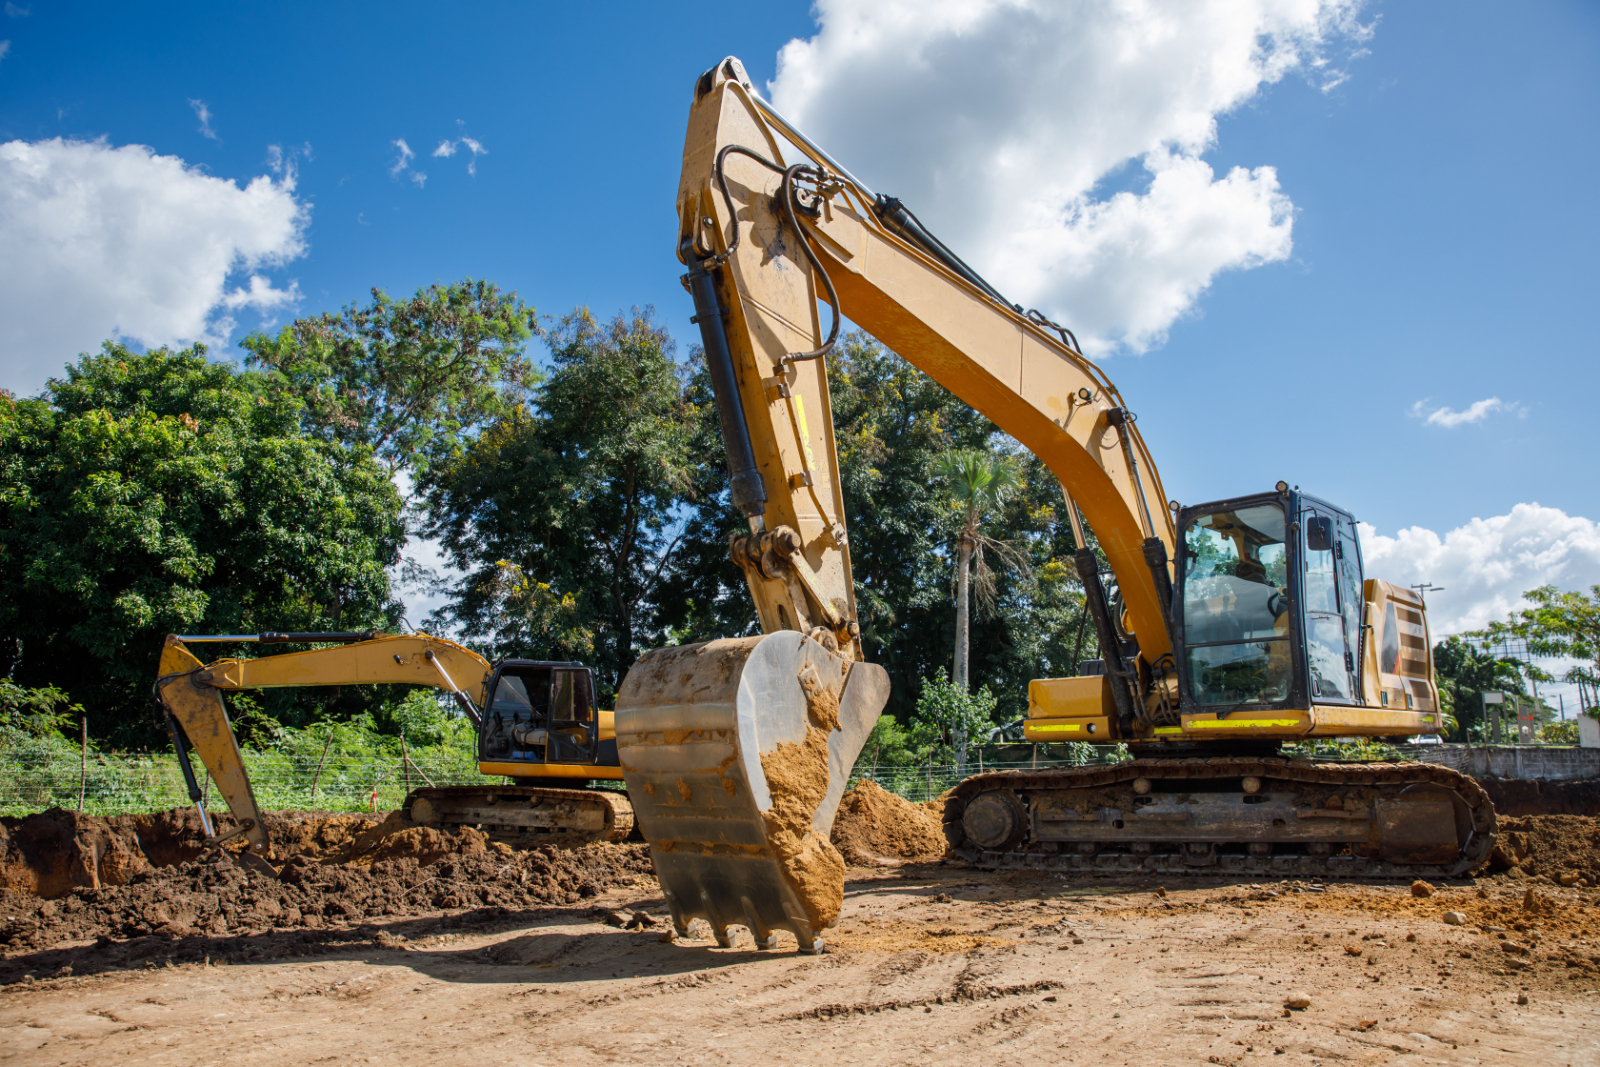 What Are The Uses Of An Excavator In Construction